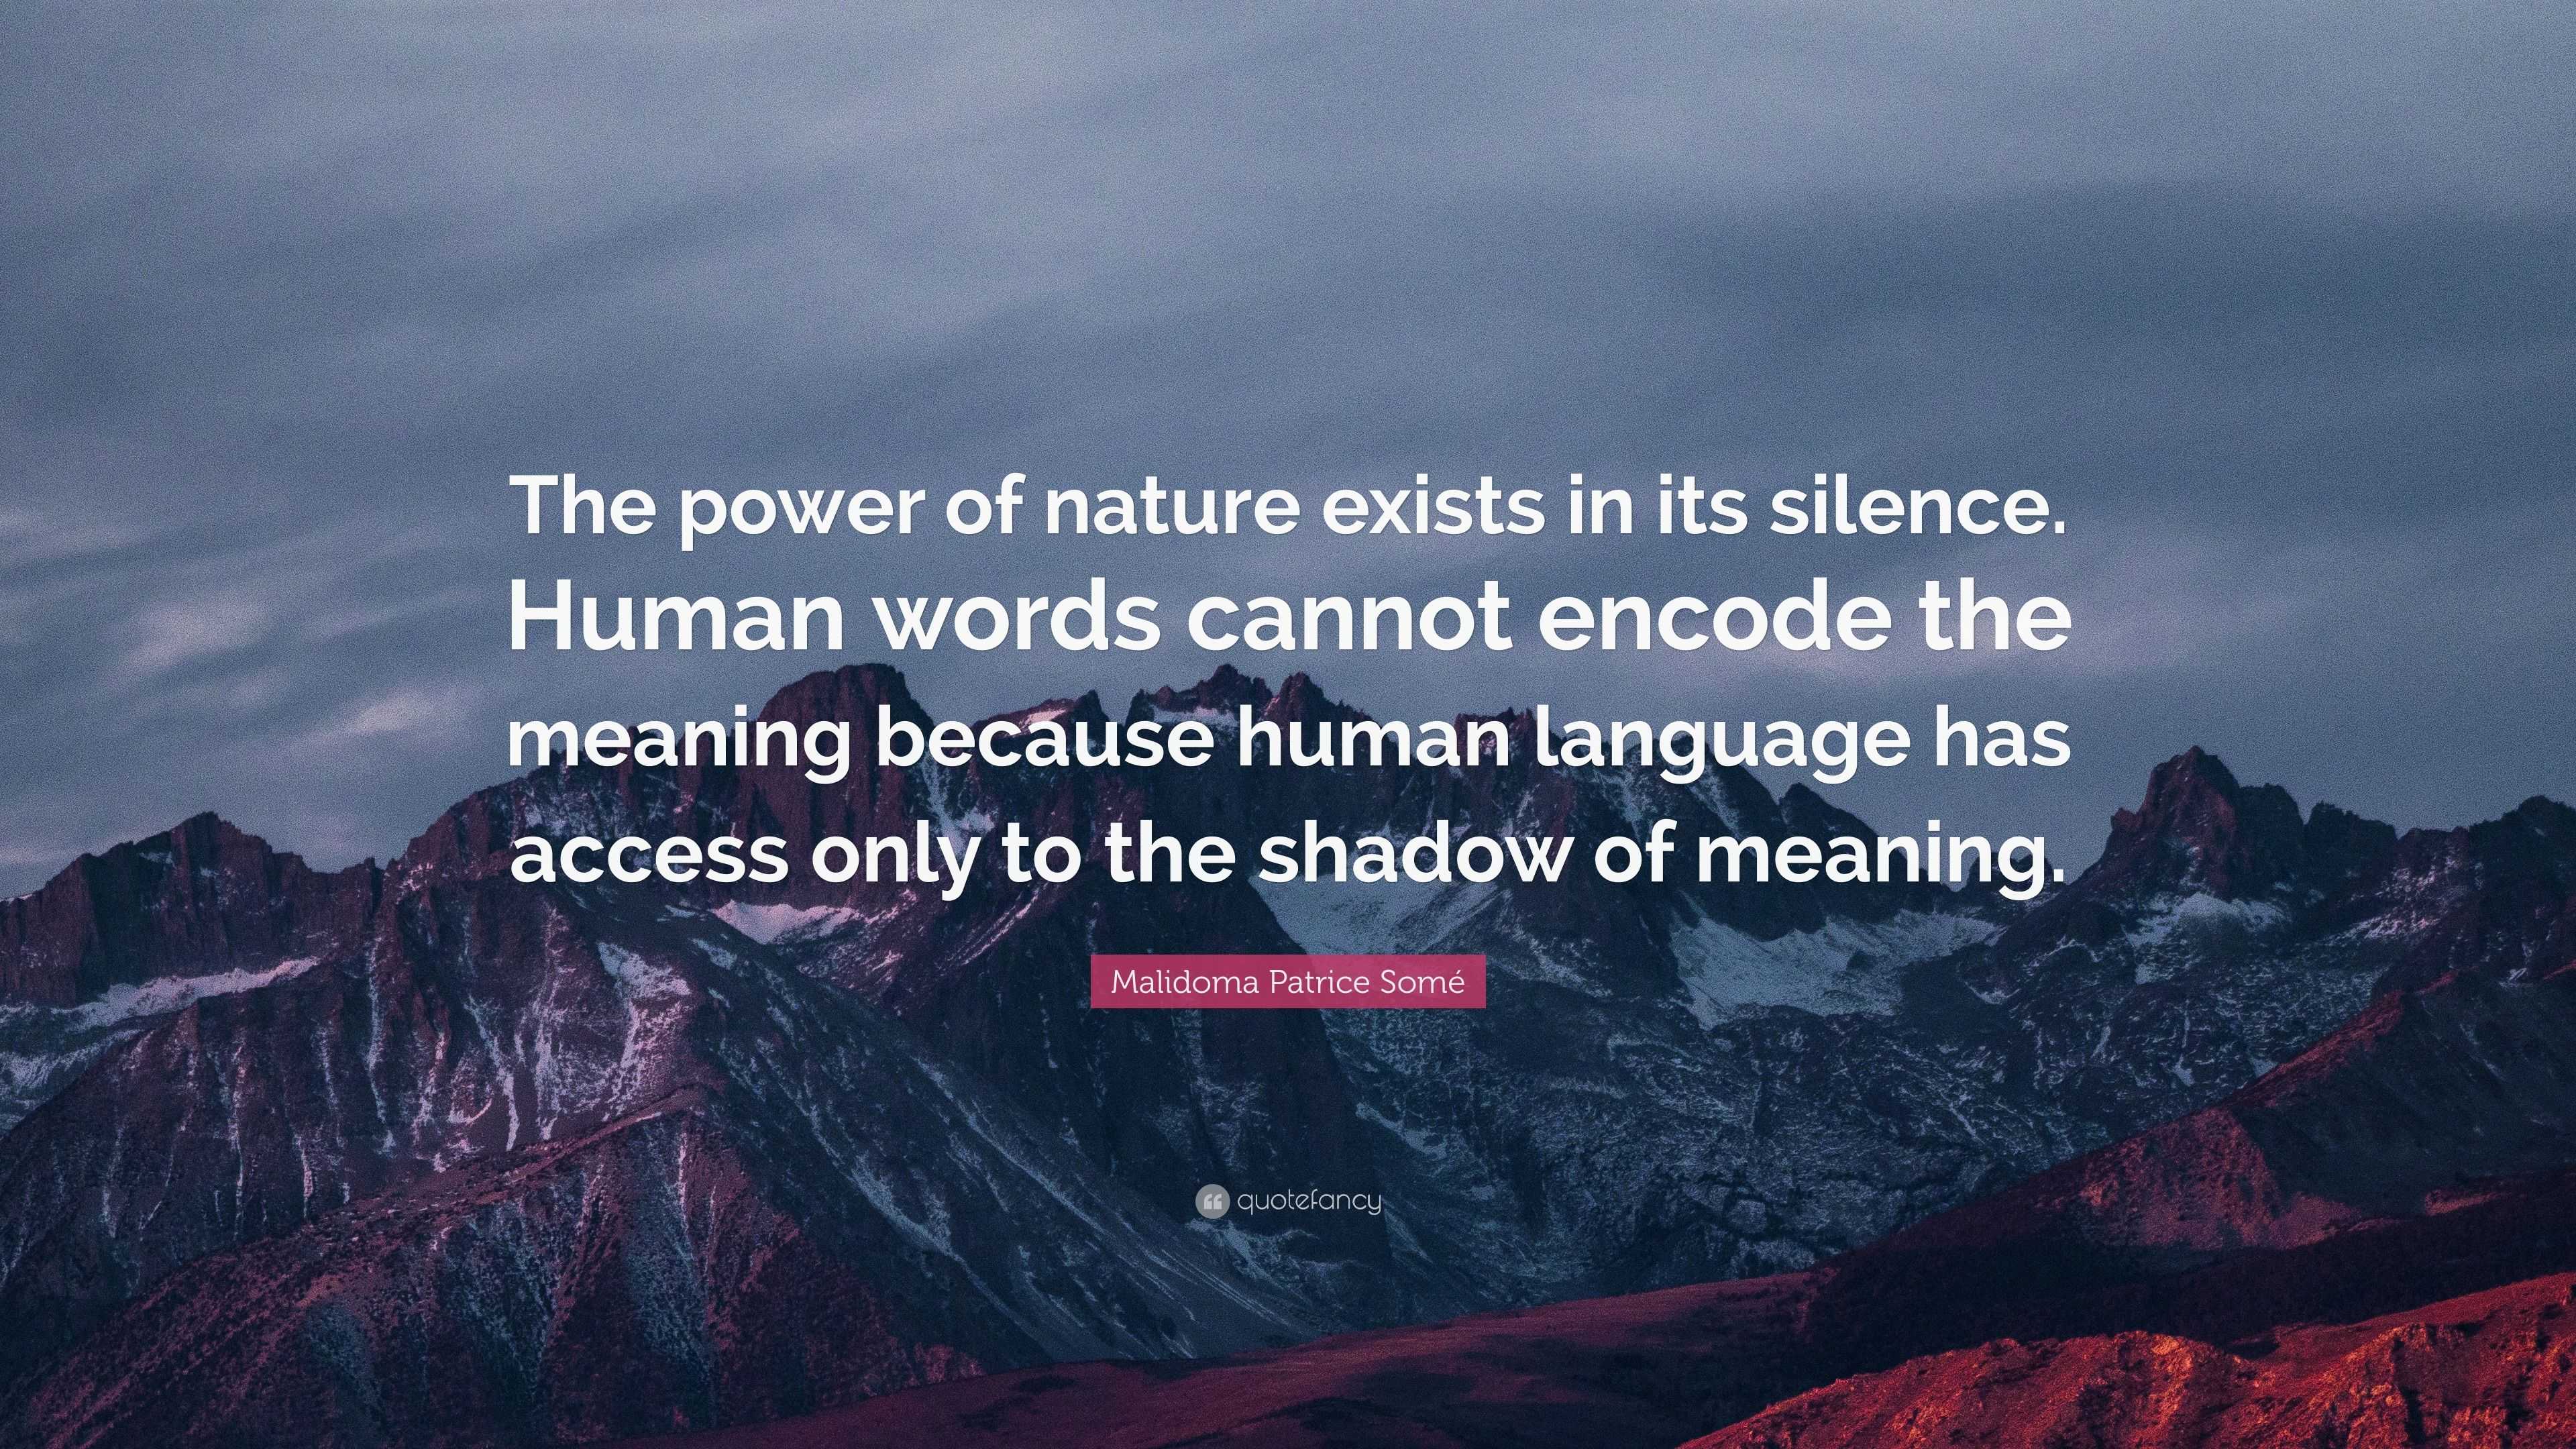 Malidoma Patrice Somé Quote: “The nature exists in its silence. words cannot encode the meaning human language has access only ...”